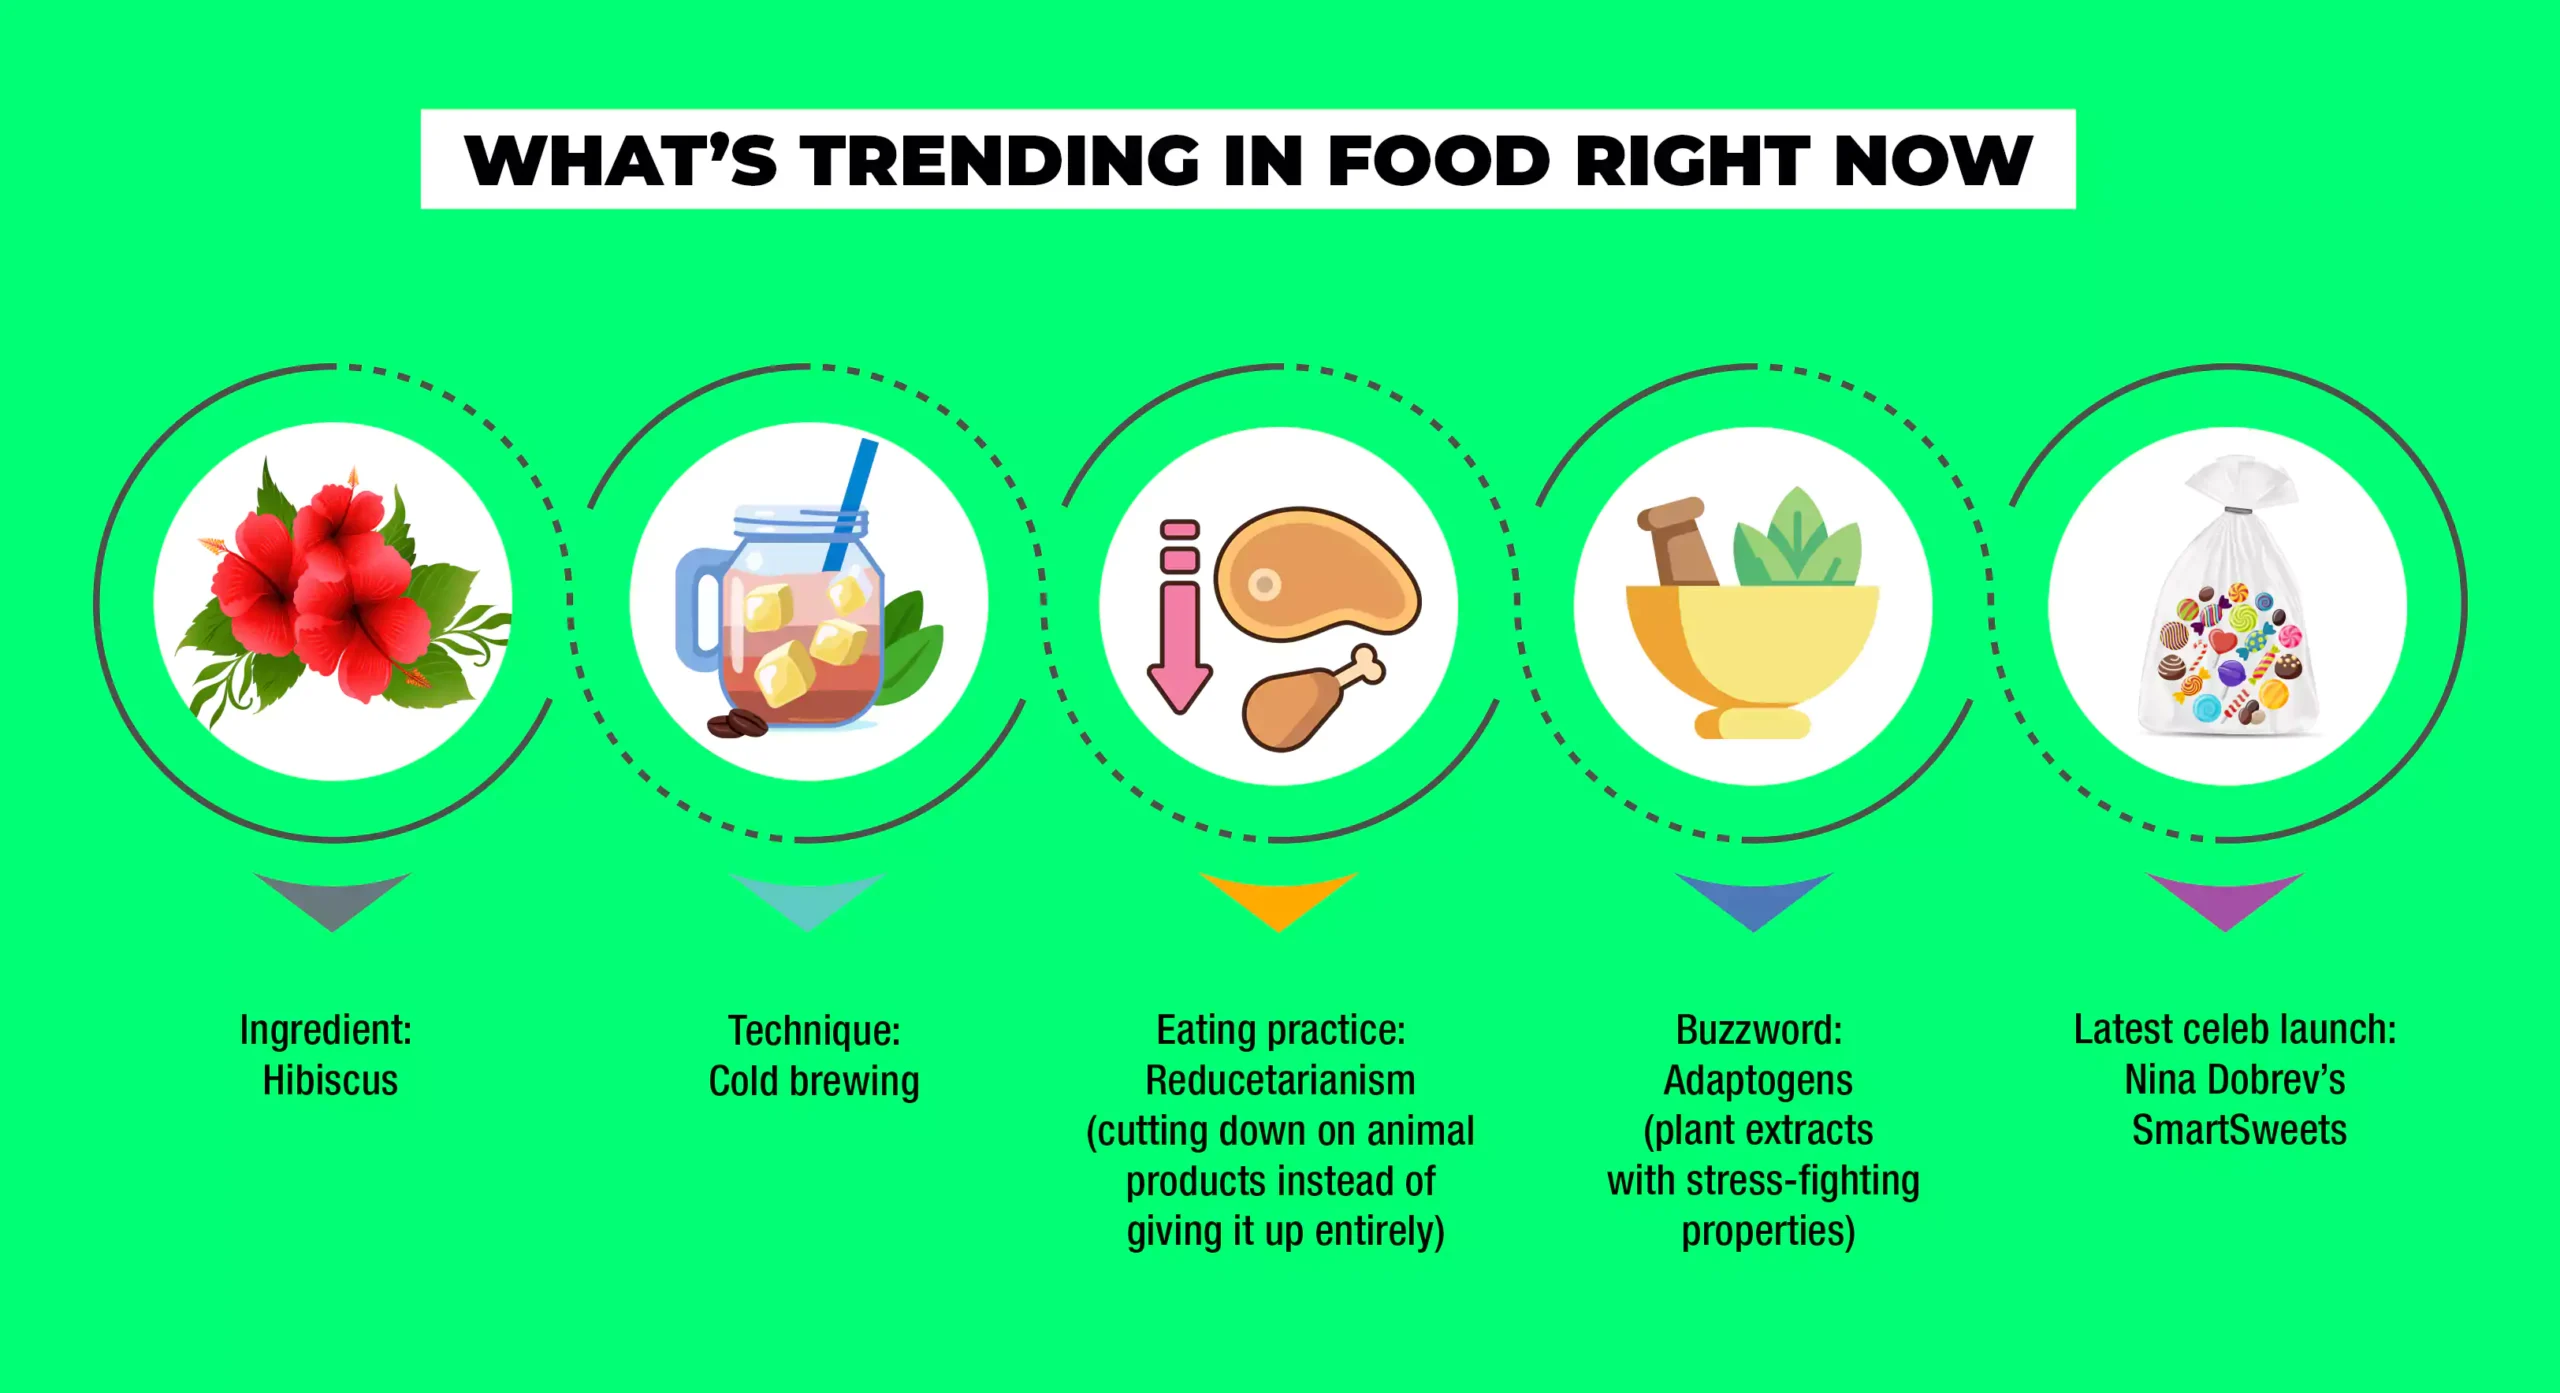 What's trending in food right now